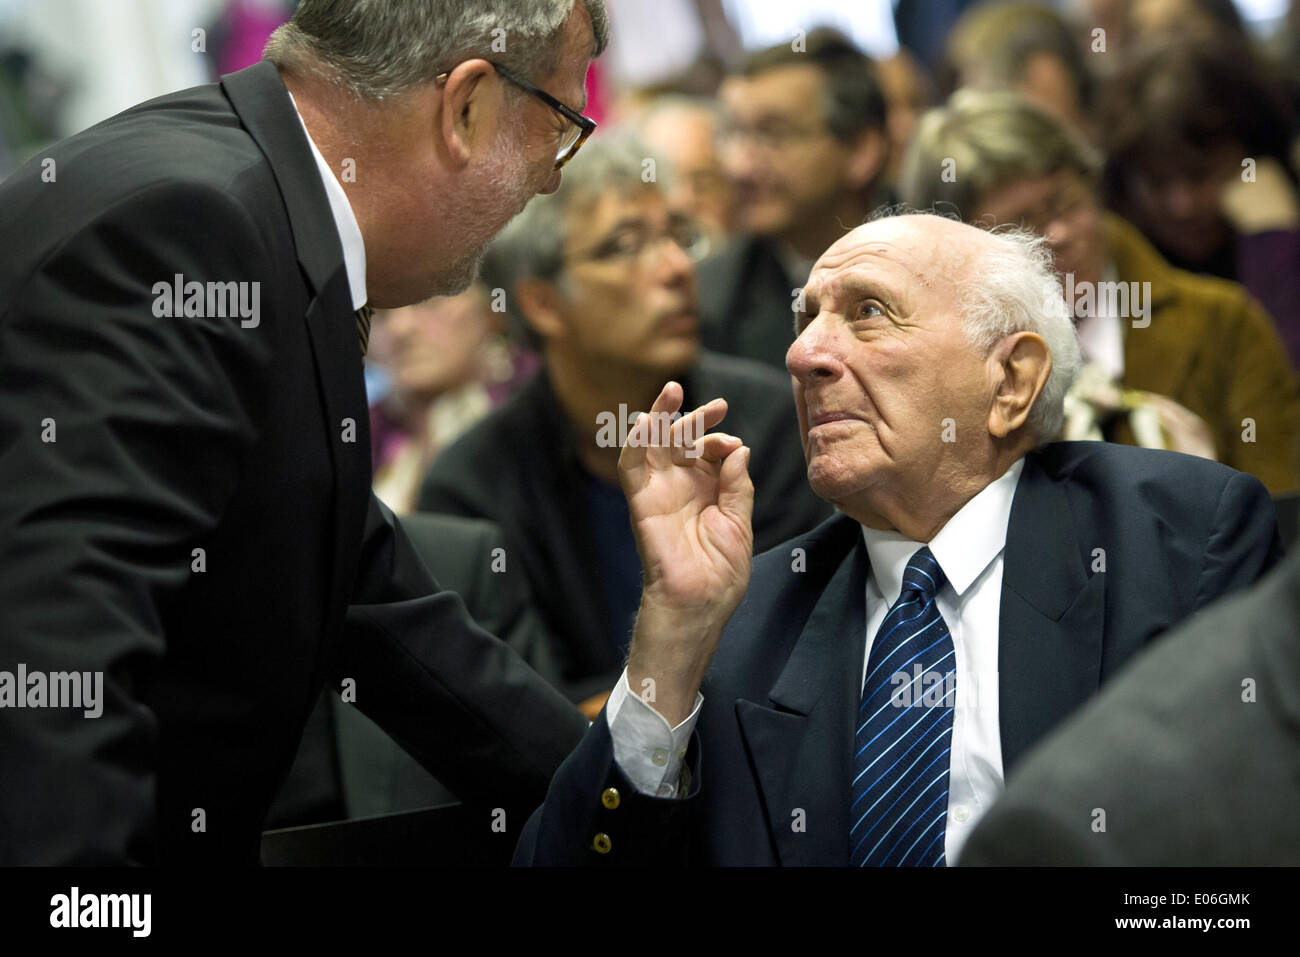 Oranienburg, Germany. 04th May, 2014. Edgar Frischmann, Sachsenhausen concentration camp survivor, talks with Hans-Joachim Laesicke (SPD, L) during the ceremony for the Franz Bobzien Prize for the 69th anniversary of the liberation of Sachsenhausen and Ravensbrueck concentration camps in Oranienburg, Germany, 04 May 2014. The pupils want to turn a former prisoner of war camp into a memorial. The 69th anniversary of the liberation is celebrated on 04 May 2014. Photo: DANIEL NAUPOLD/dpa/Alamy Live News Stock Photo